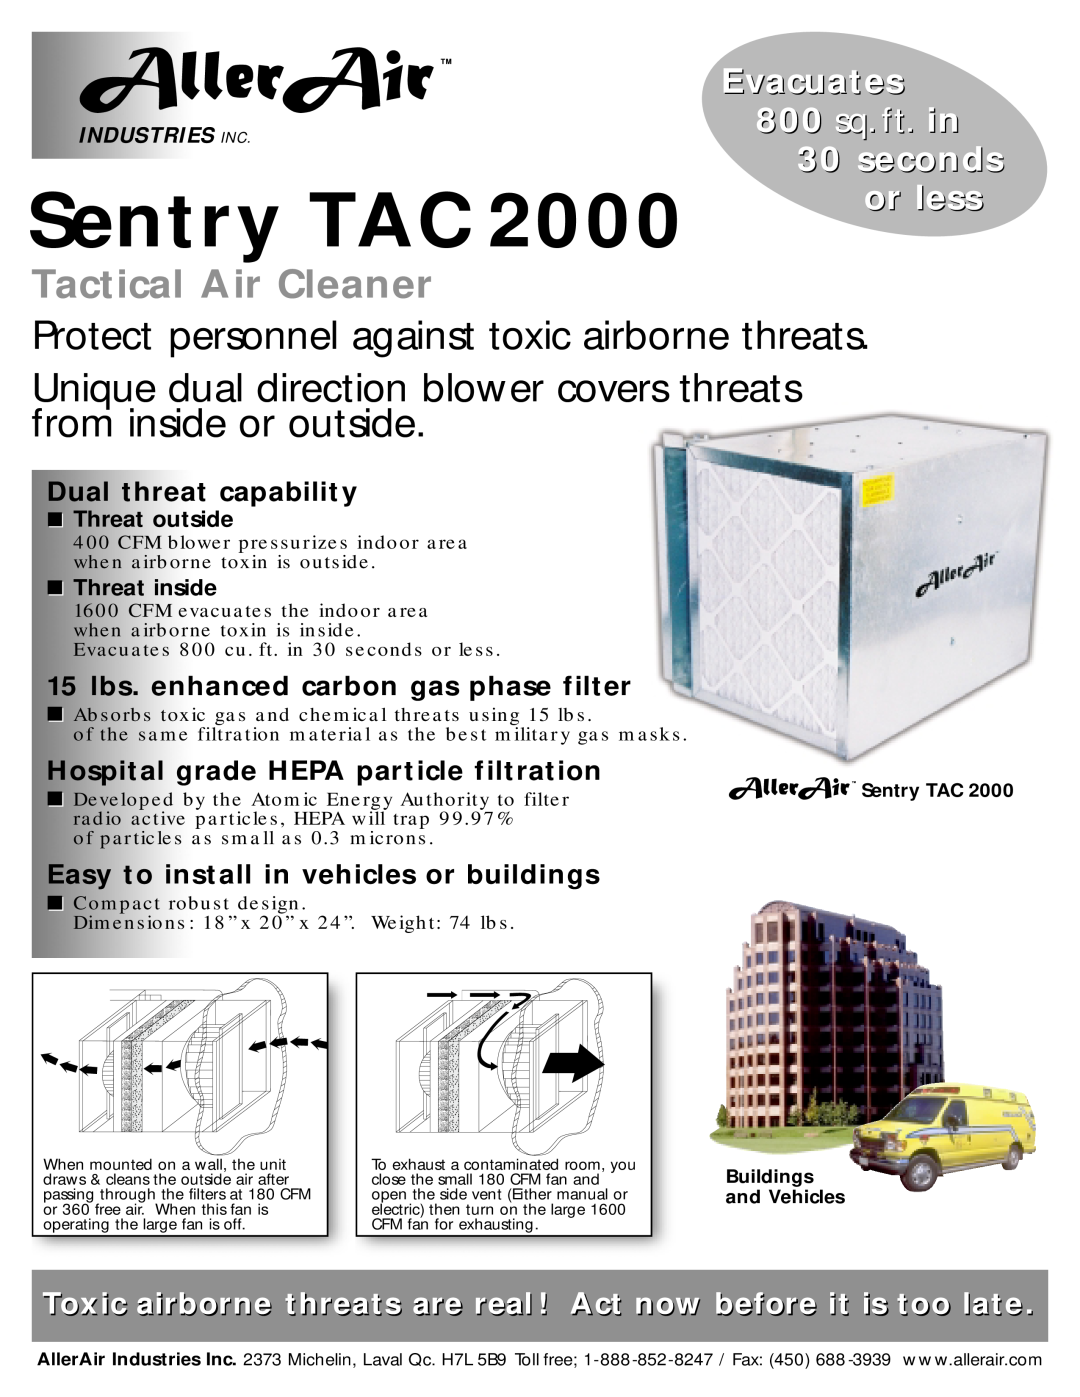 AllerAir Sentry TAC 2000 dimensions Tactical Air Cleaner, Protect personnel against toxic airborne threats, Evacuates 